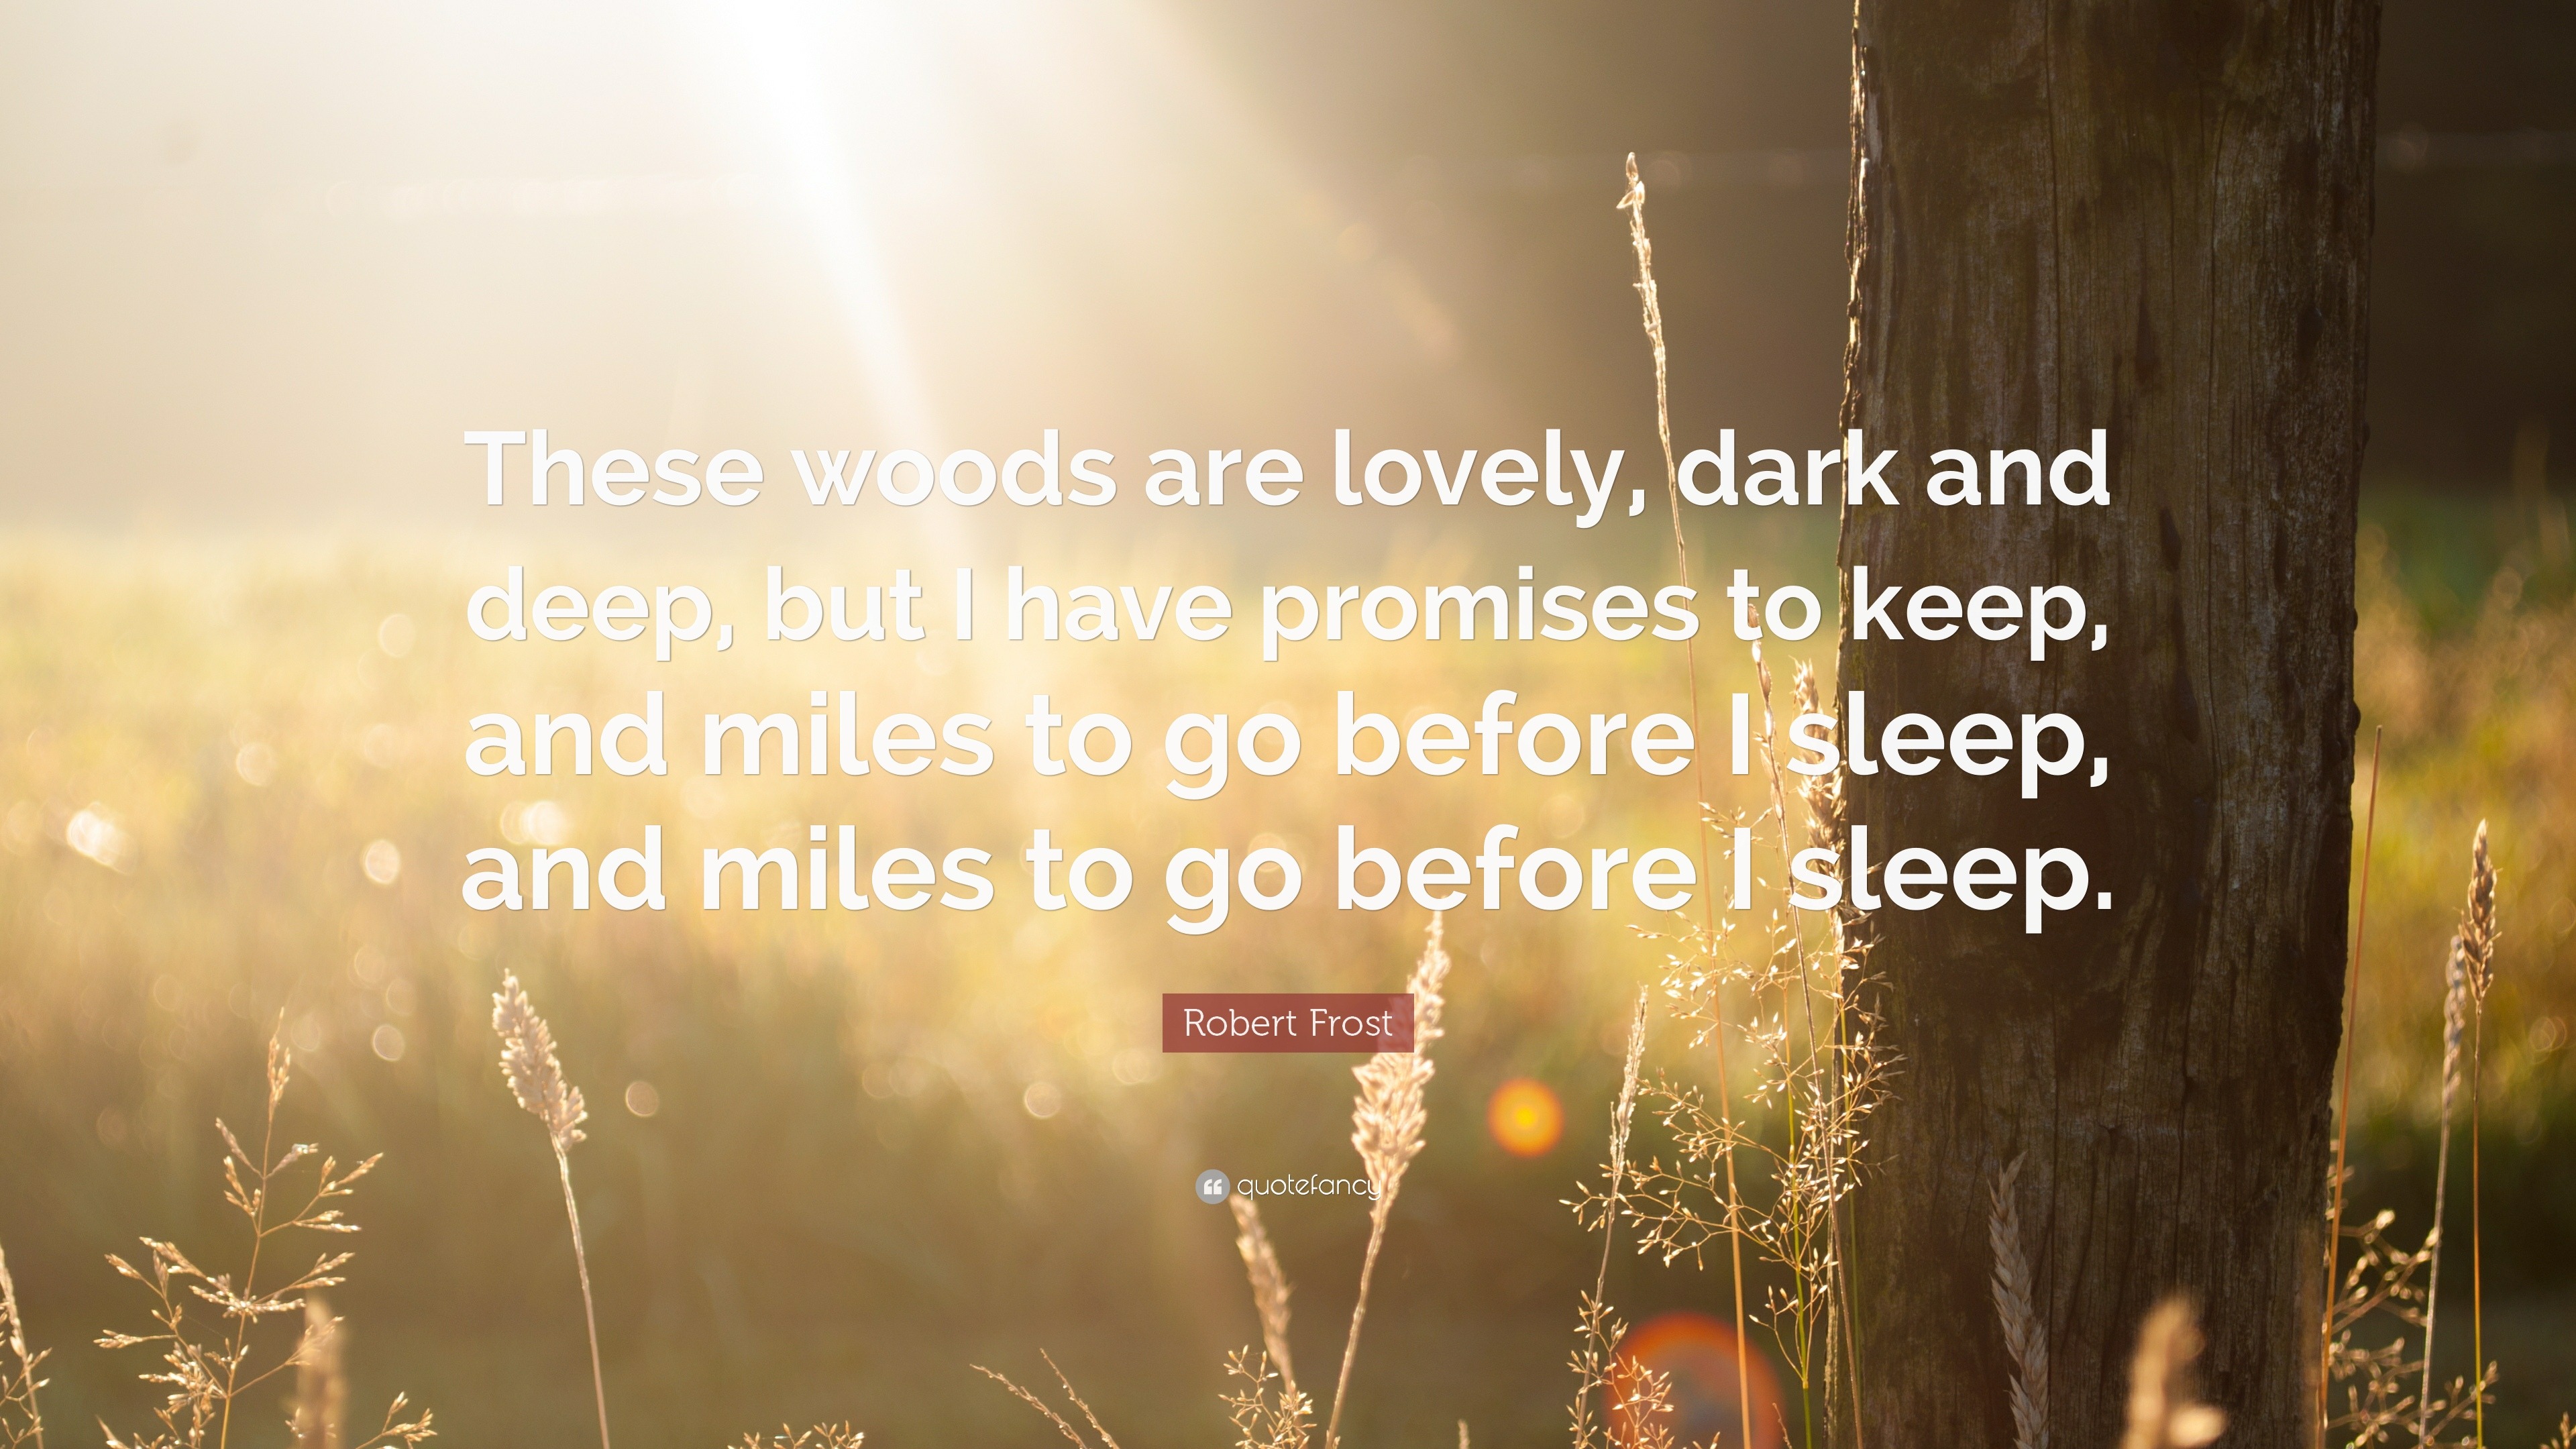 Robert Frost Quote: “The woods are lovely, dark and deep, but I have ...